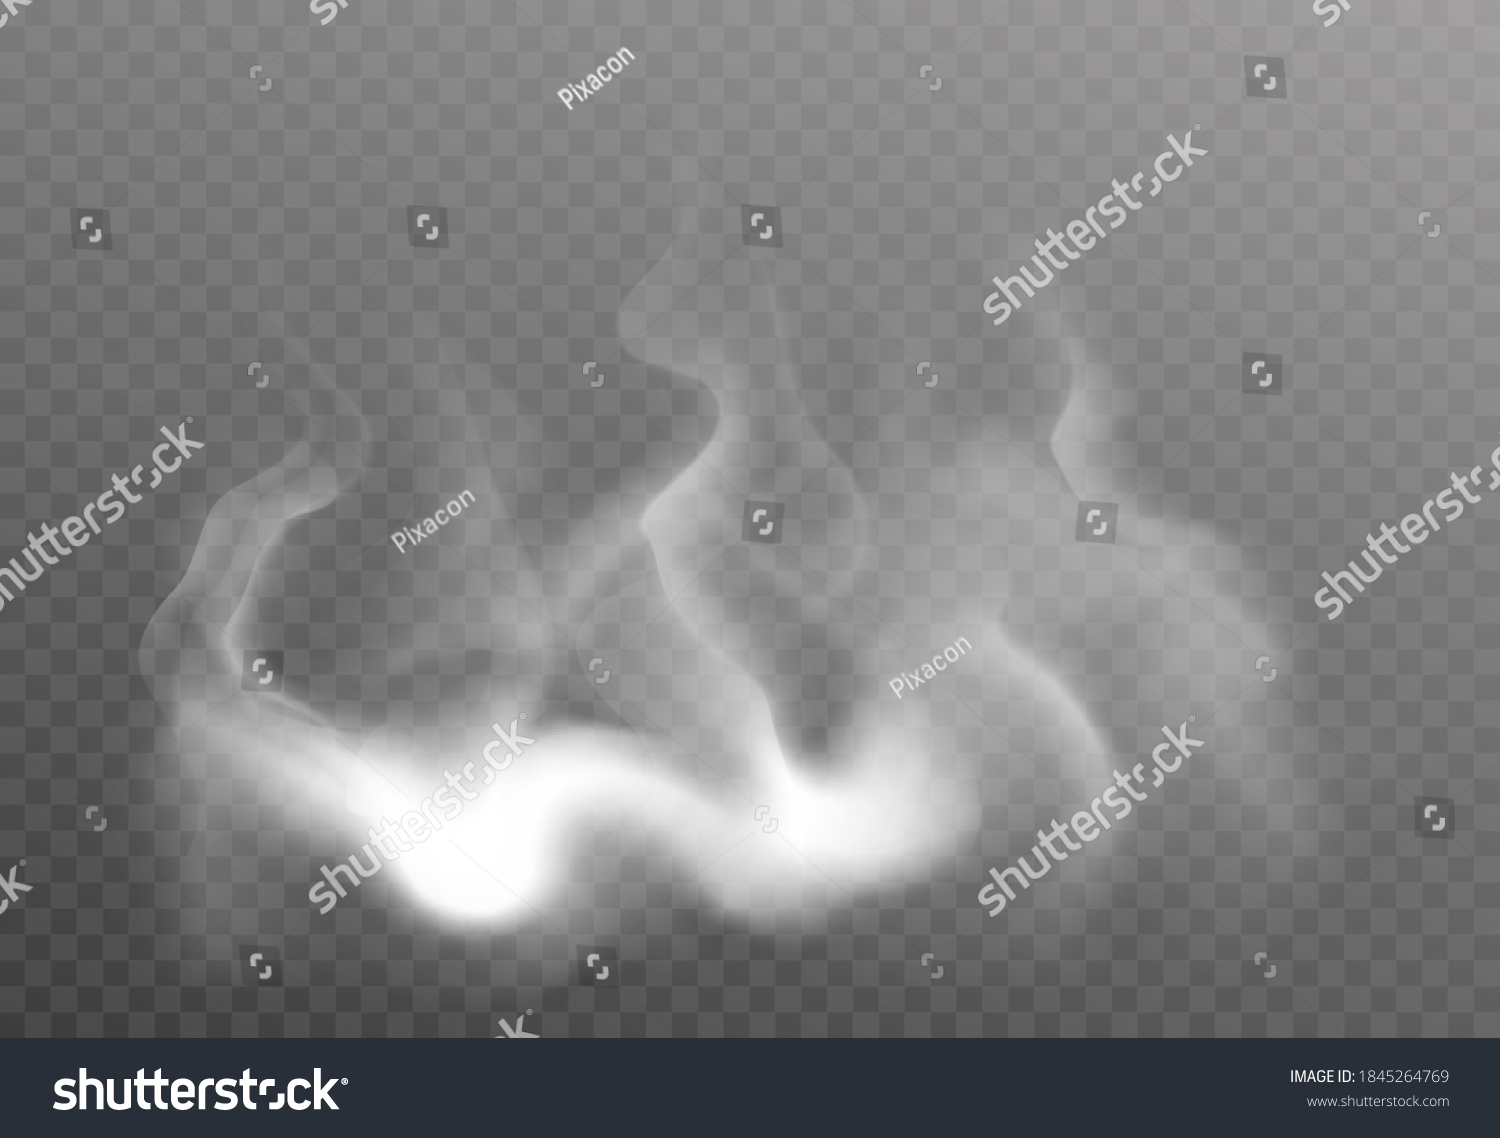 Transparent special effect of hot steam or smoke. Vector gas, fog isolated on dark background. Realistic wavy vector illustration elements. #1845264769